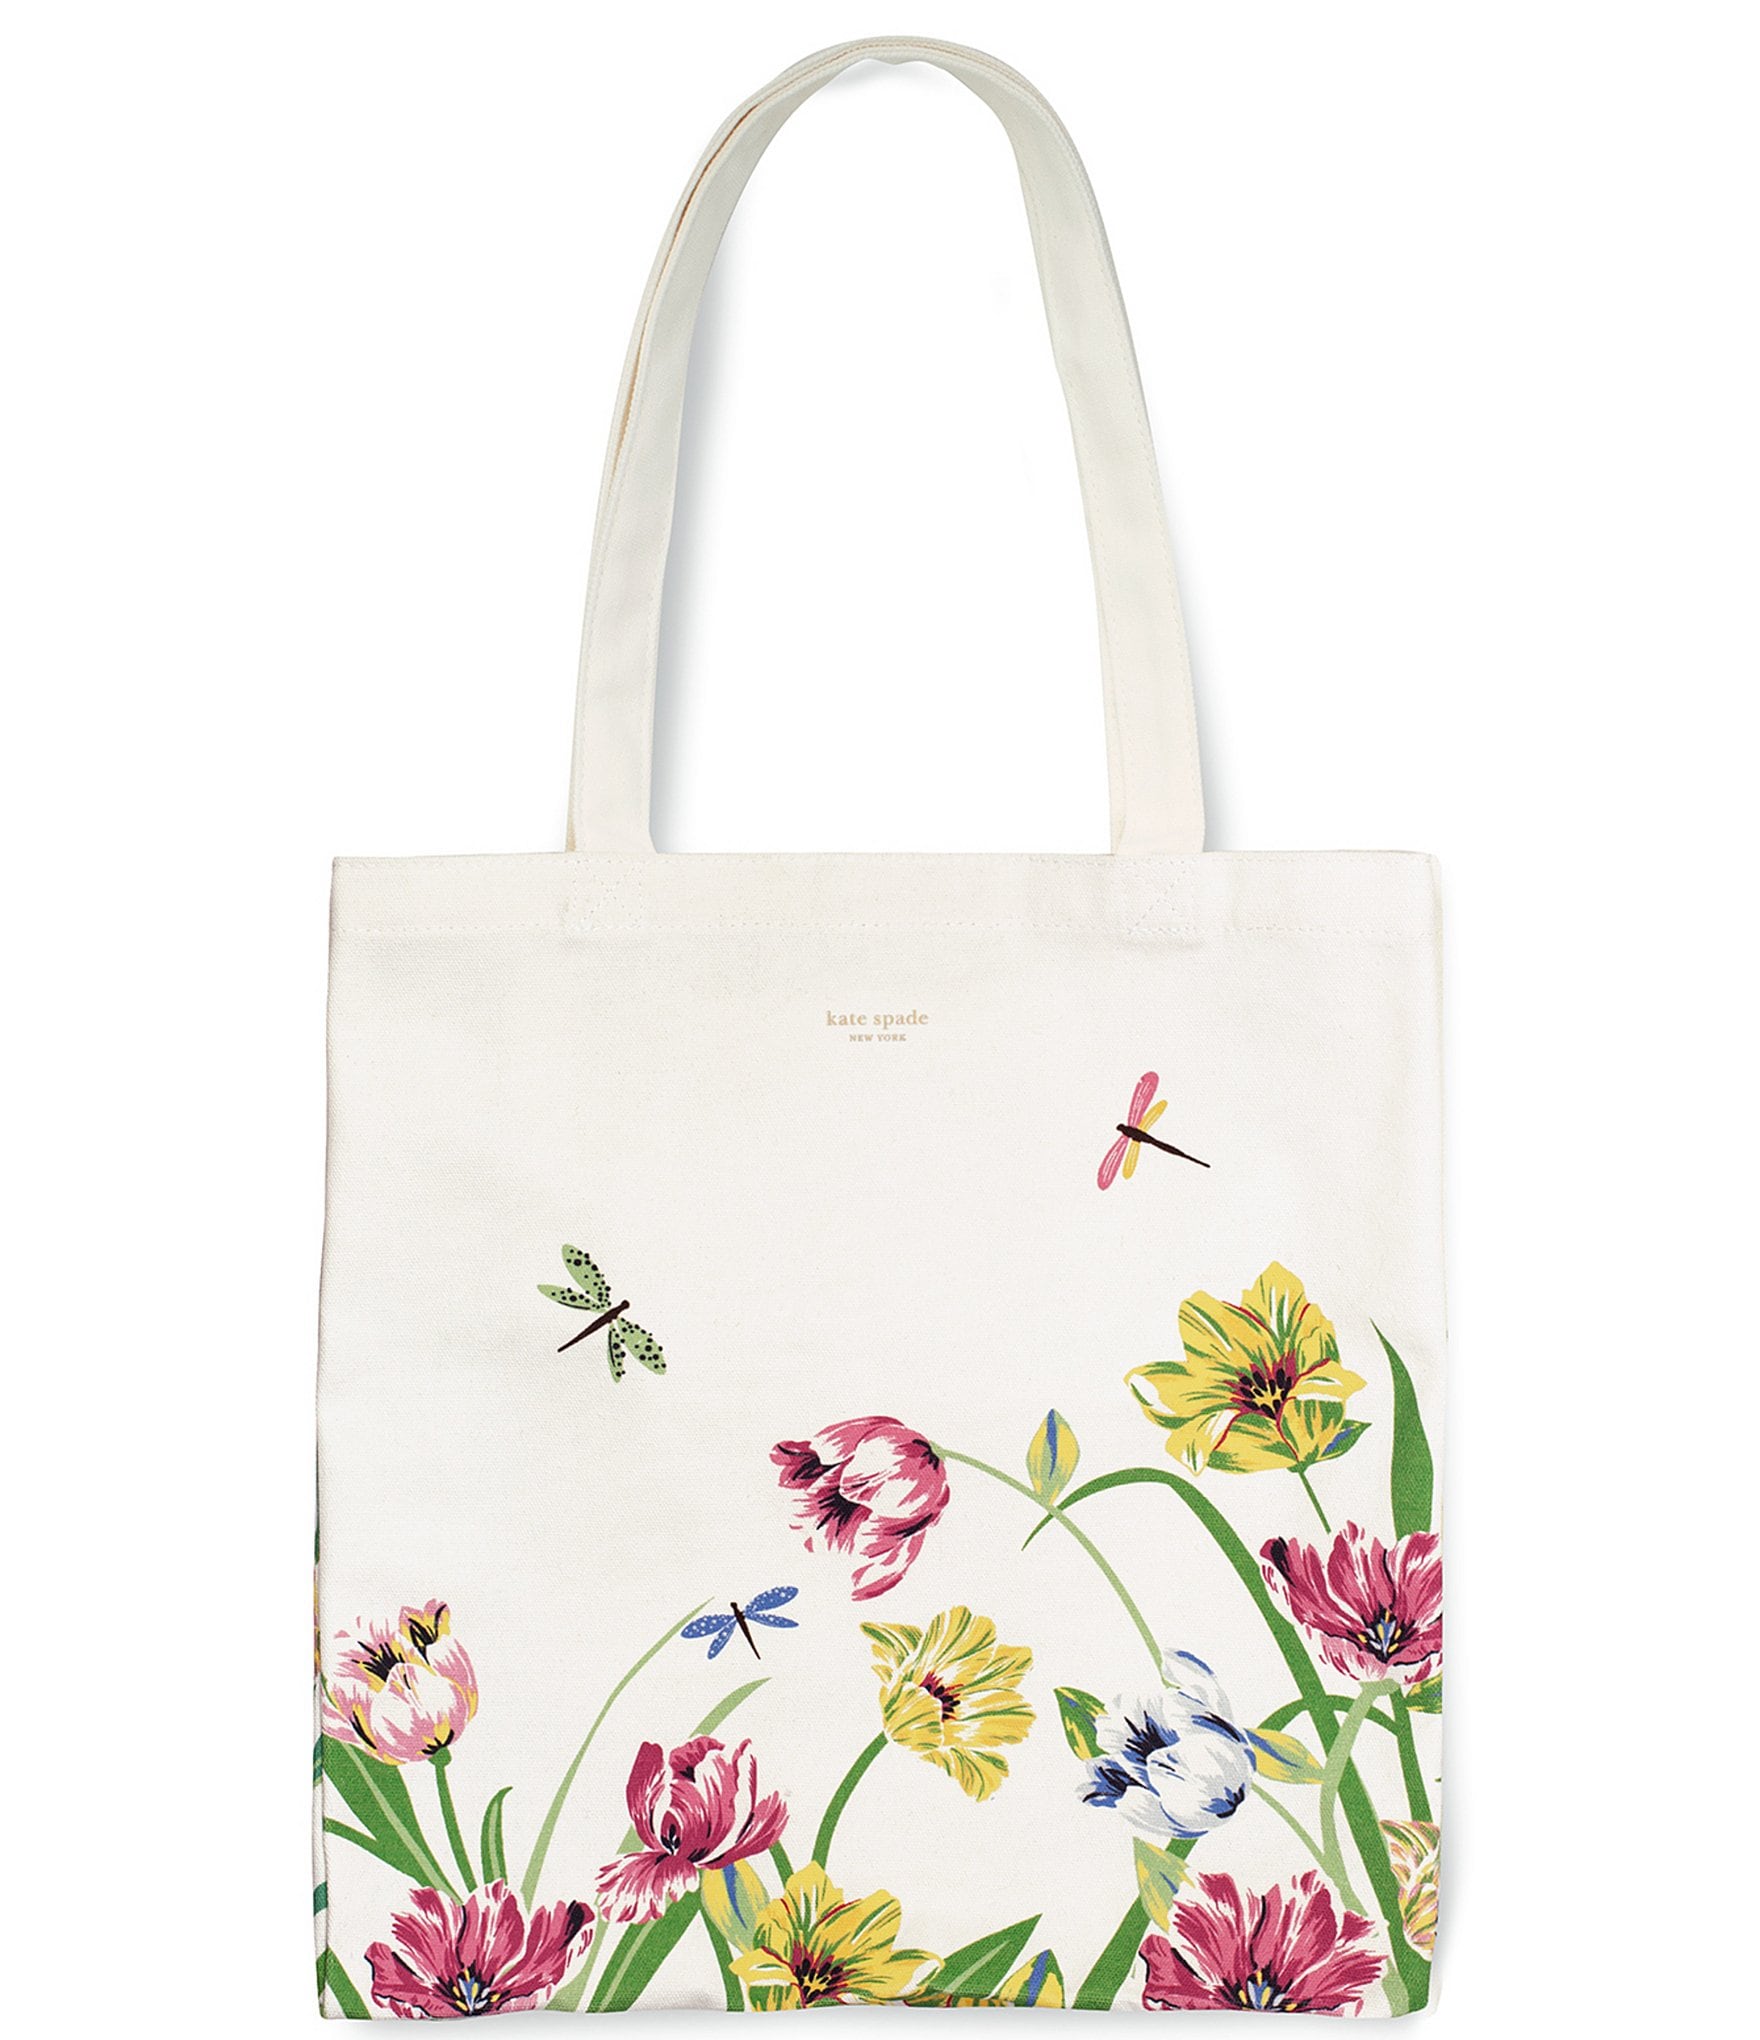 I bought this Kate Spade canvas tote on clearance. Loved it when I